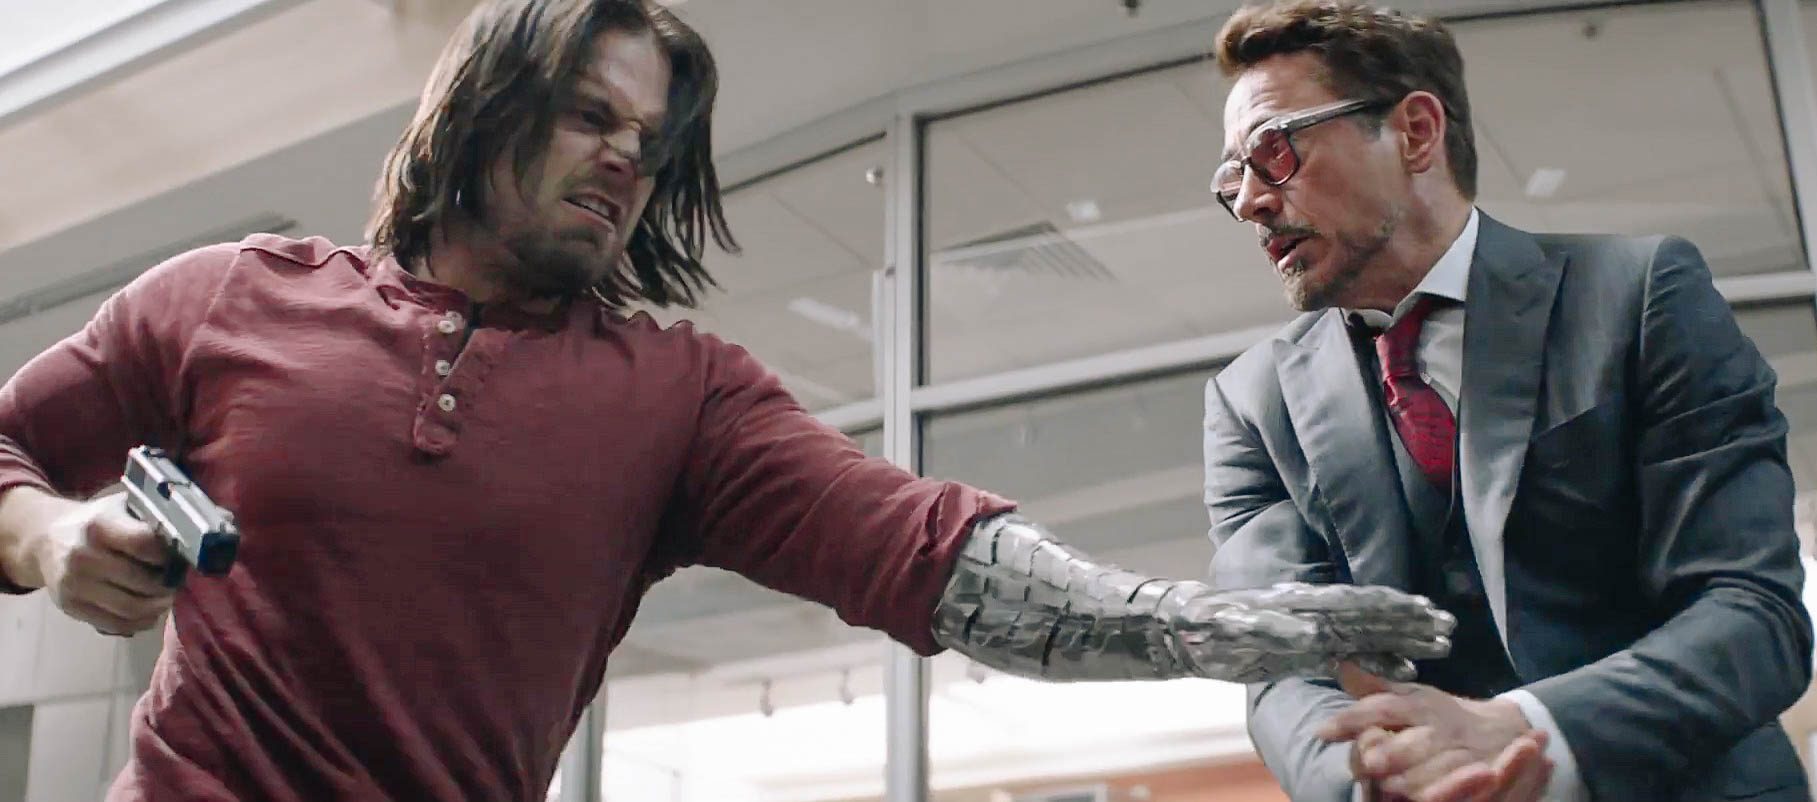 WATCH: Team Iron Man takes on the Winter Soldier in ‘Civil War’ clip